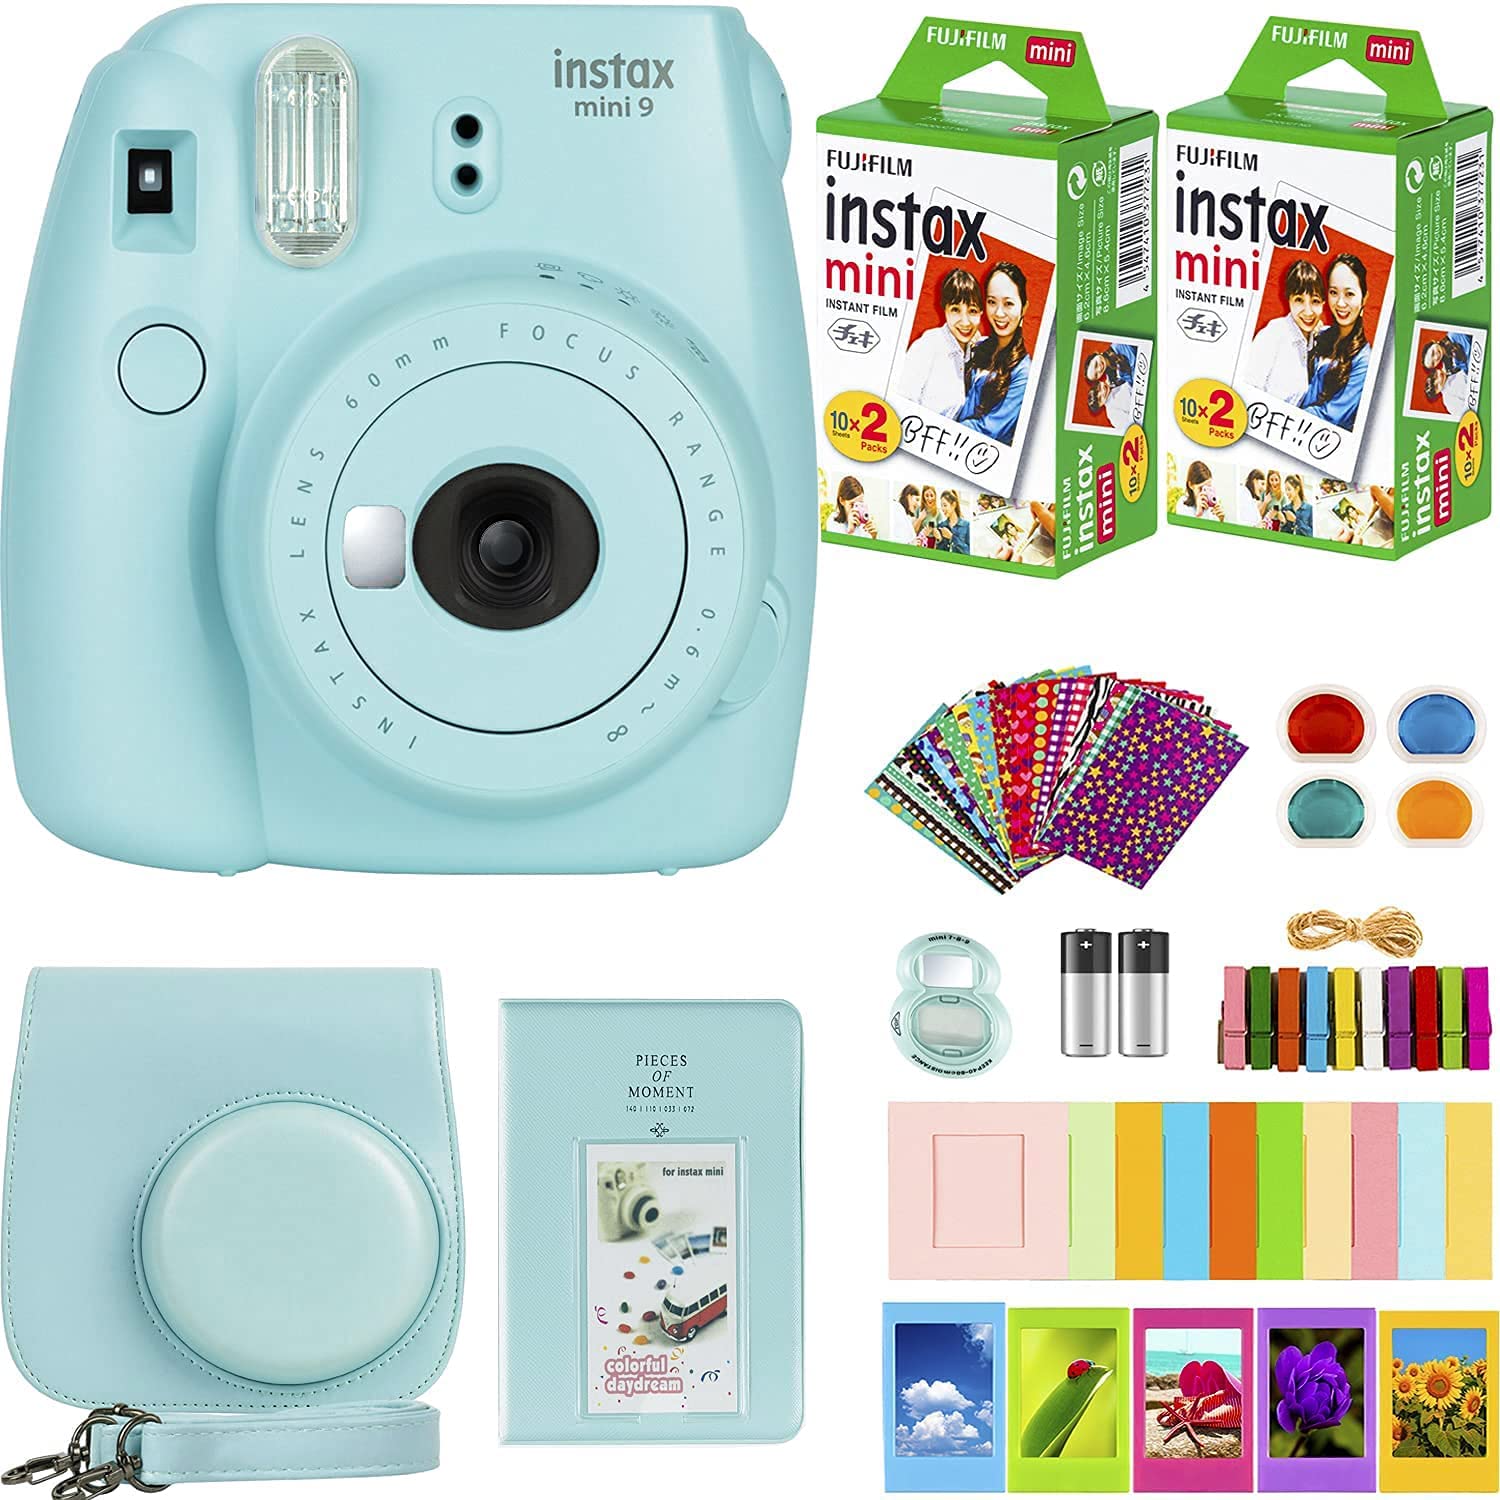 Instax Mini 9 Review: Cheap and Cheerful Instant Camera - Tech Advisor